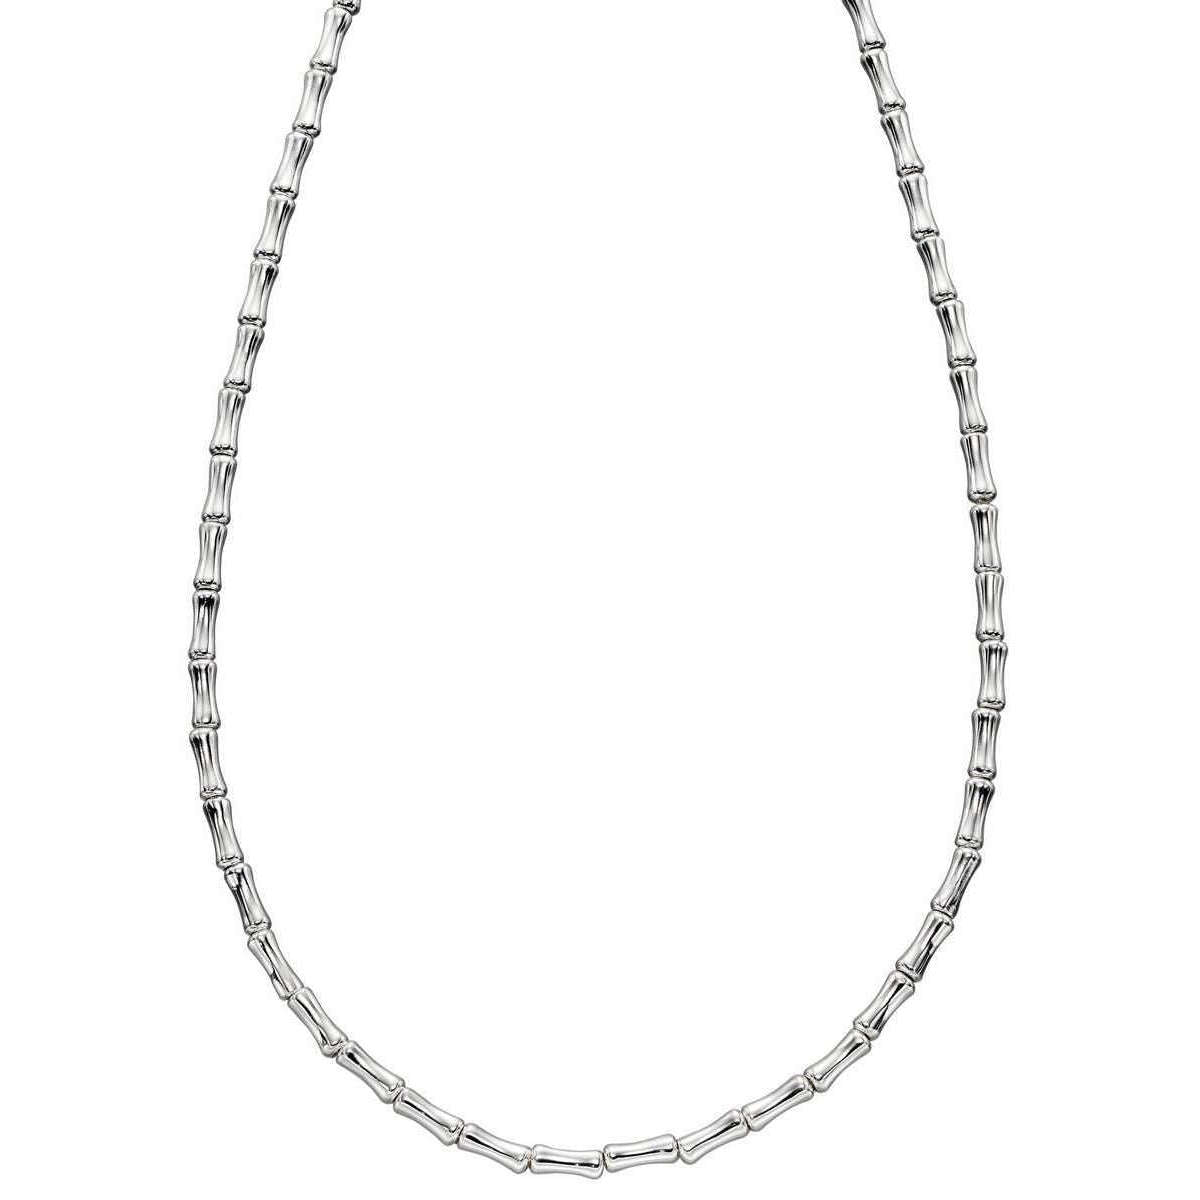 Elements Silver Bamboo Necklace - Silver